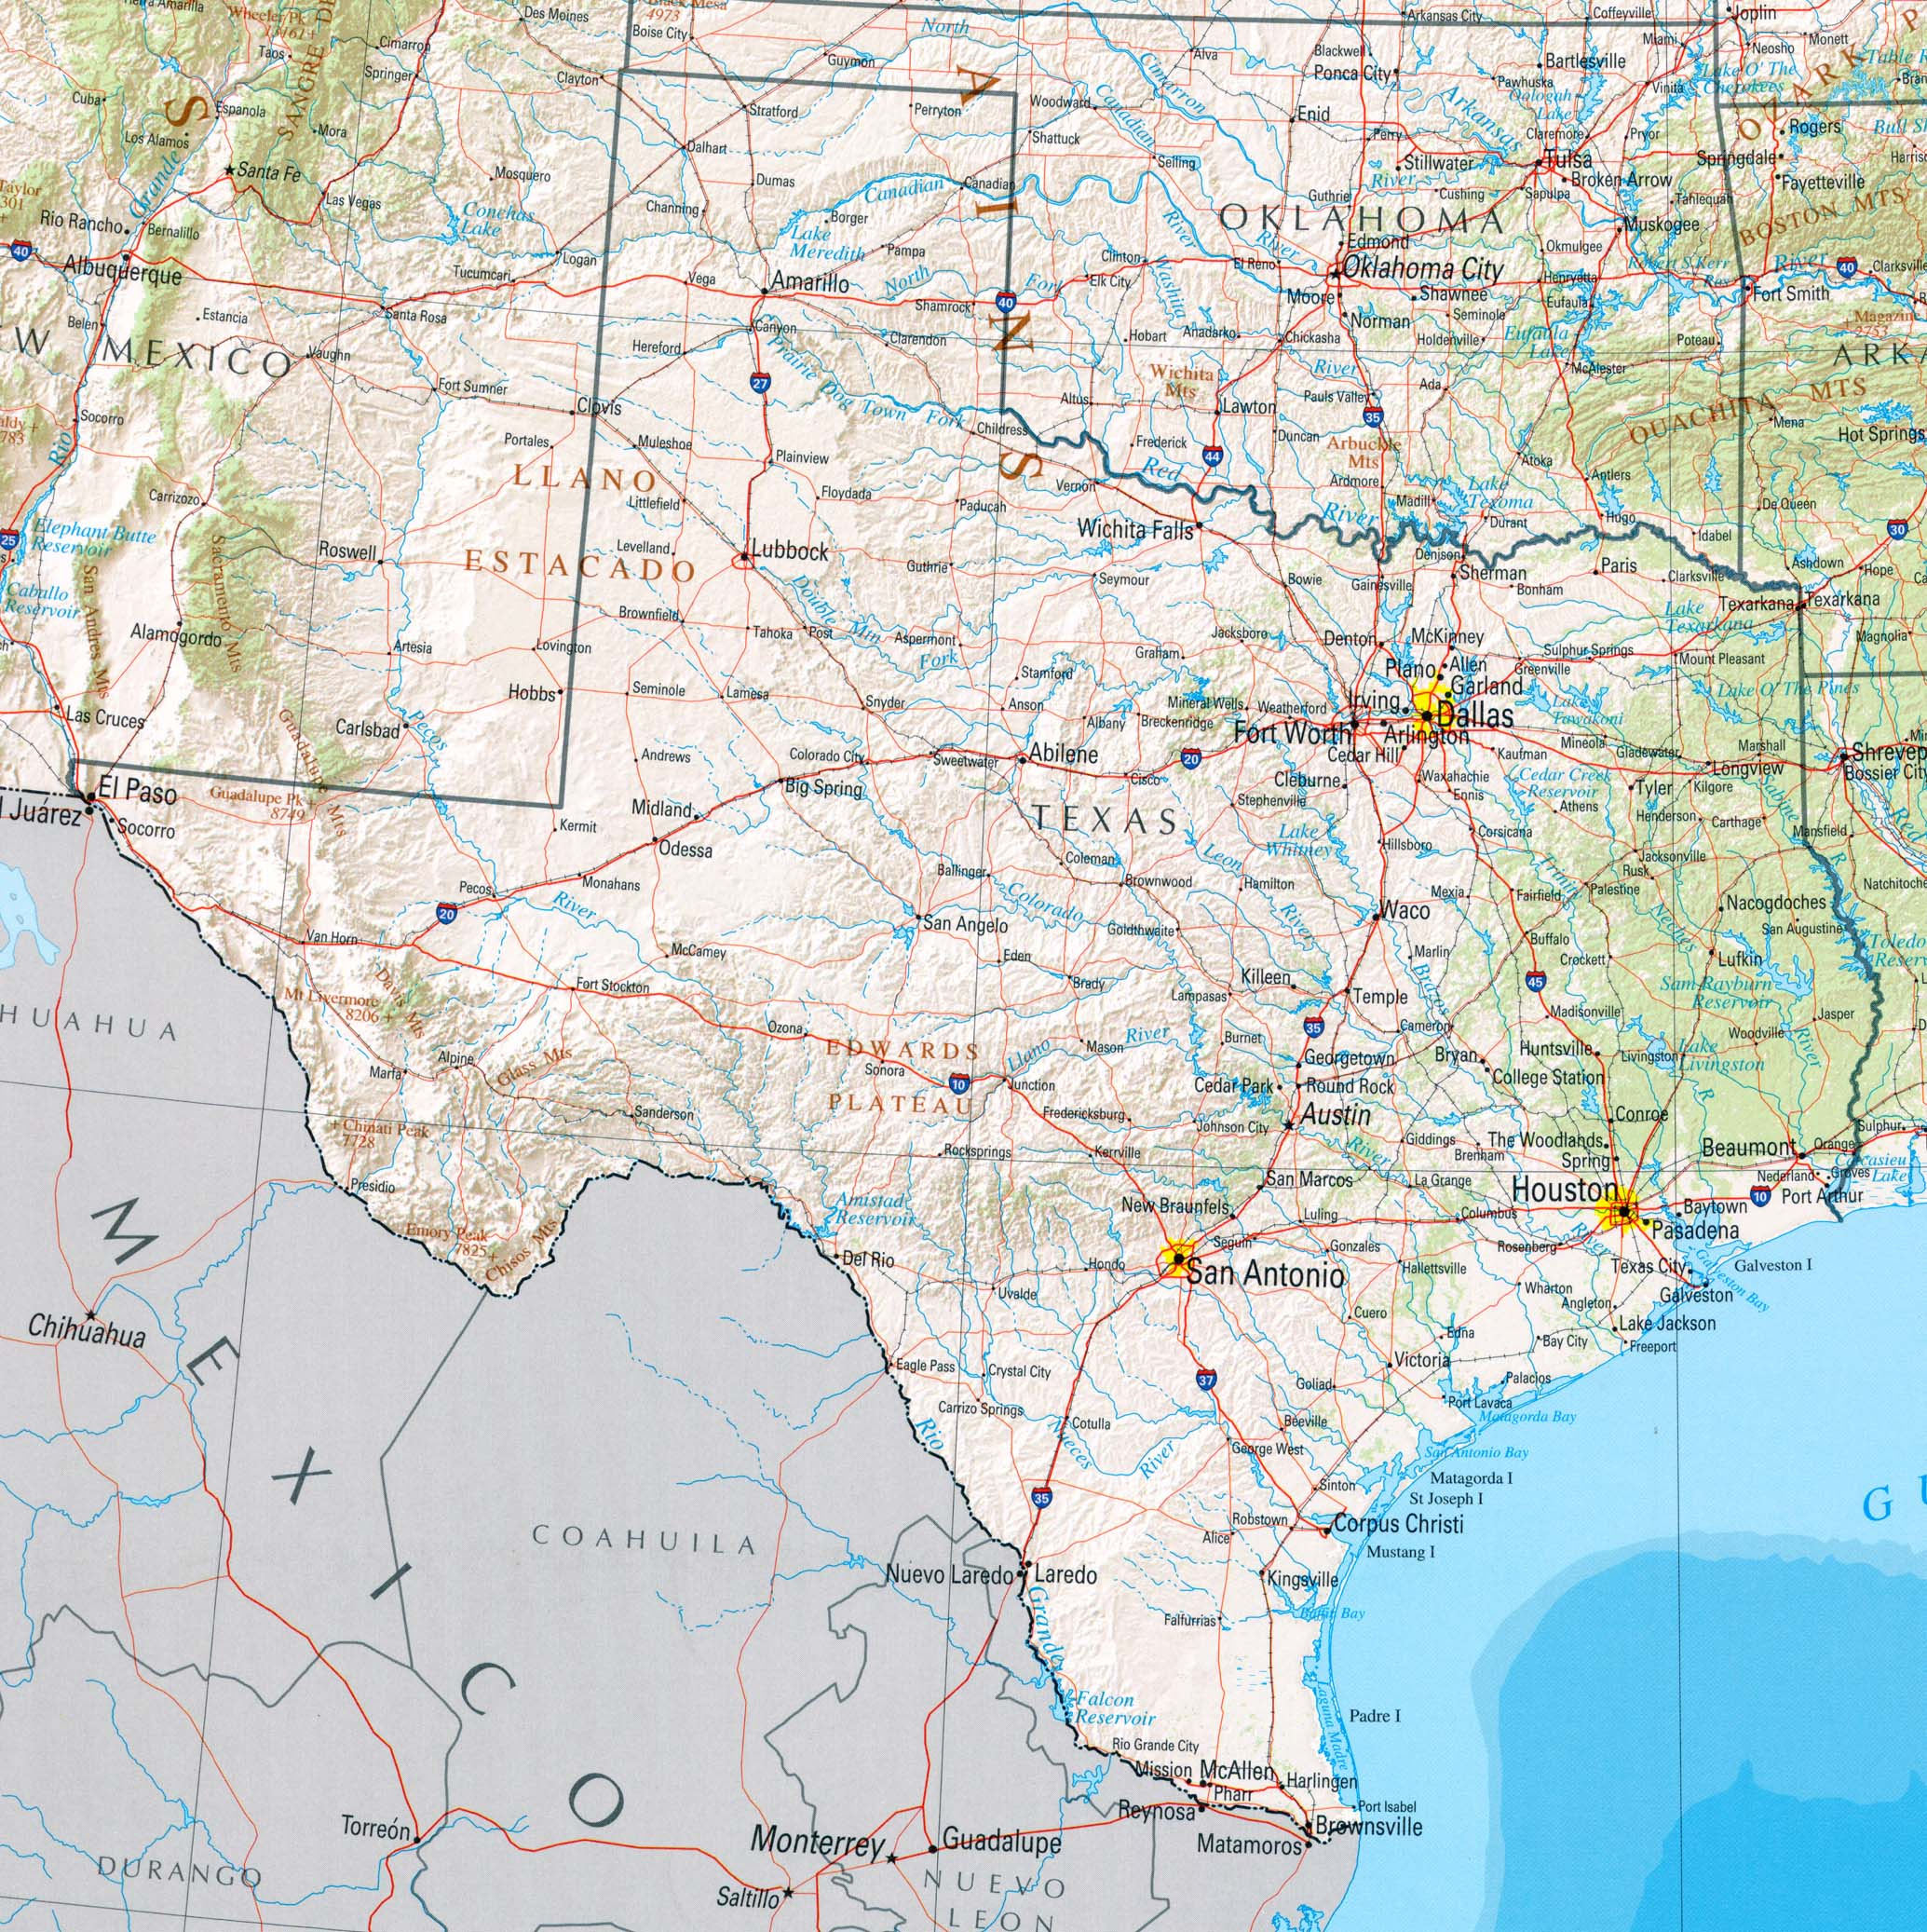 Texas Maps - Perry-Castañeda Map Collection - Ut Library Online - Google Maps Harlingen Texas